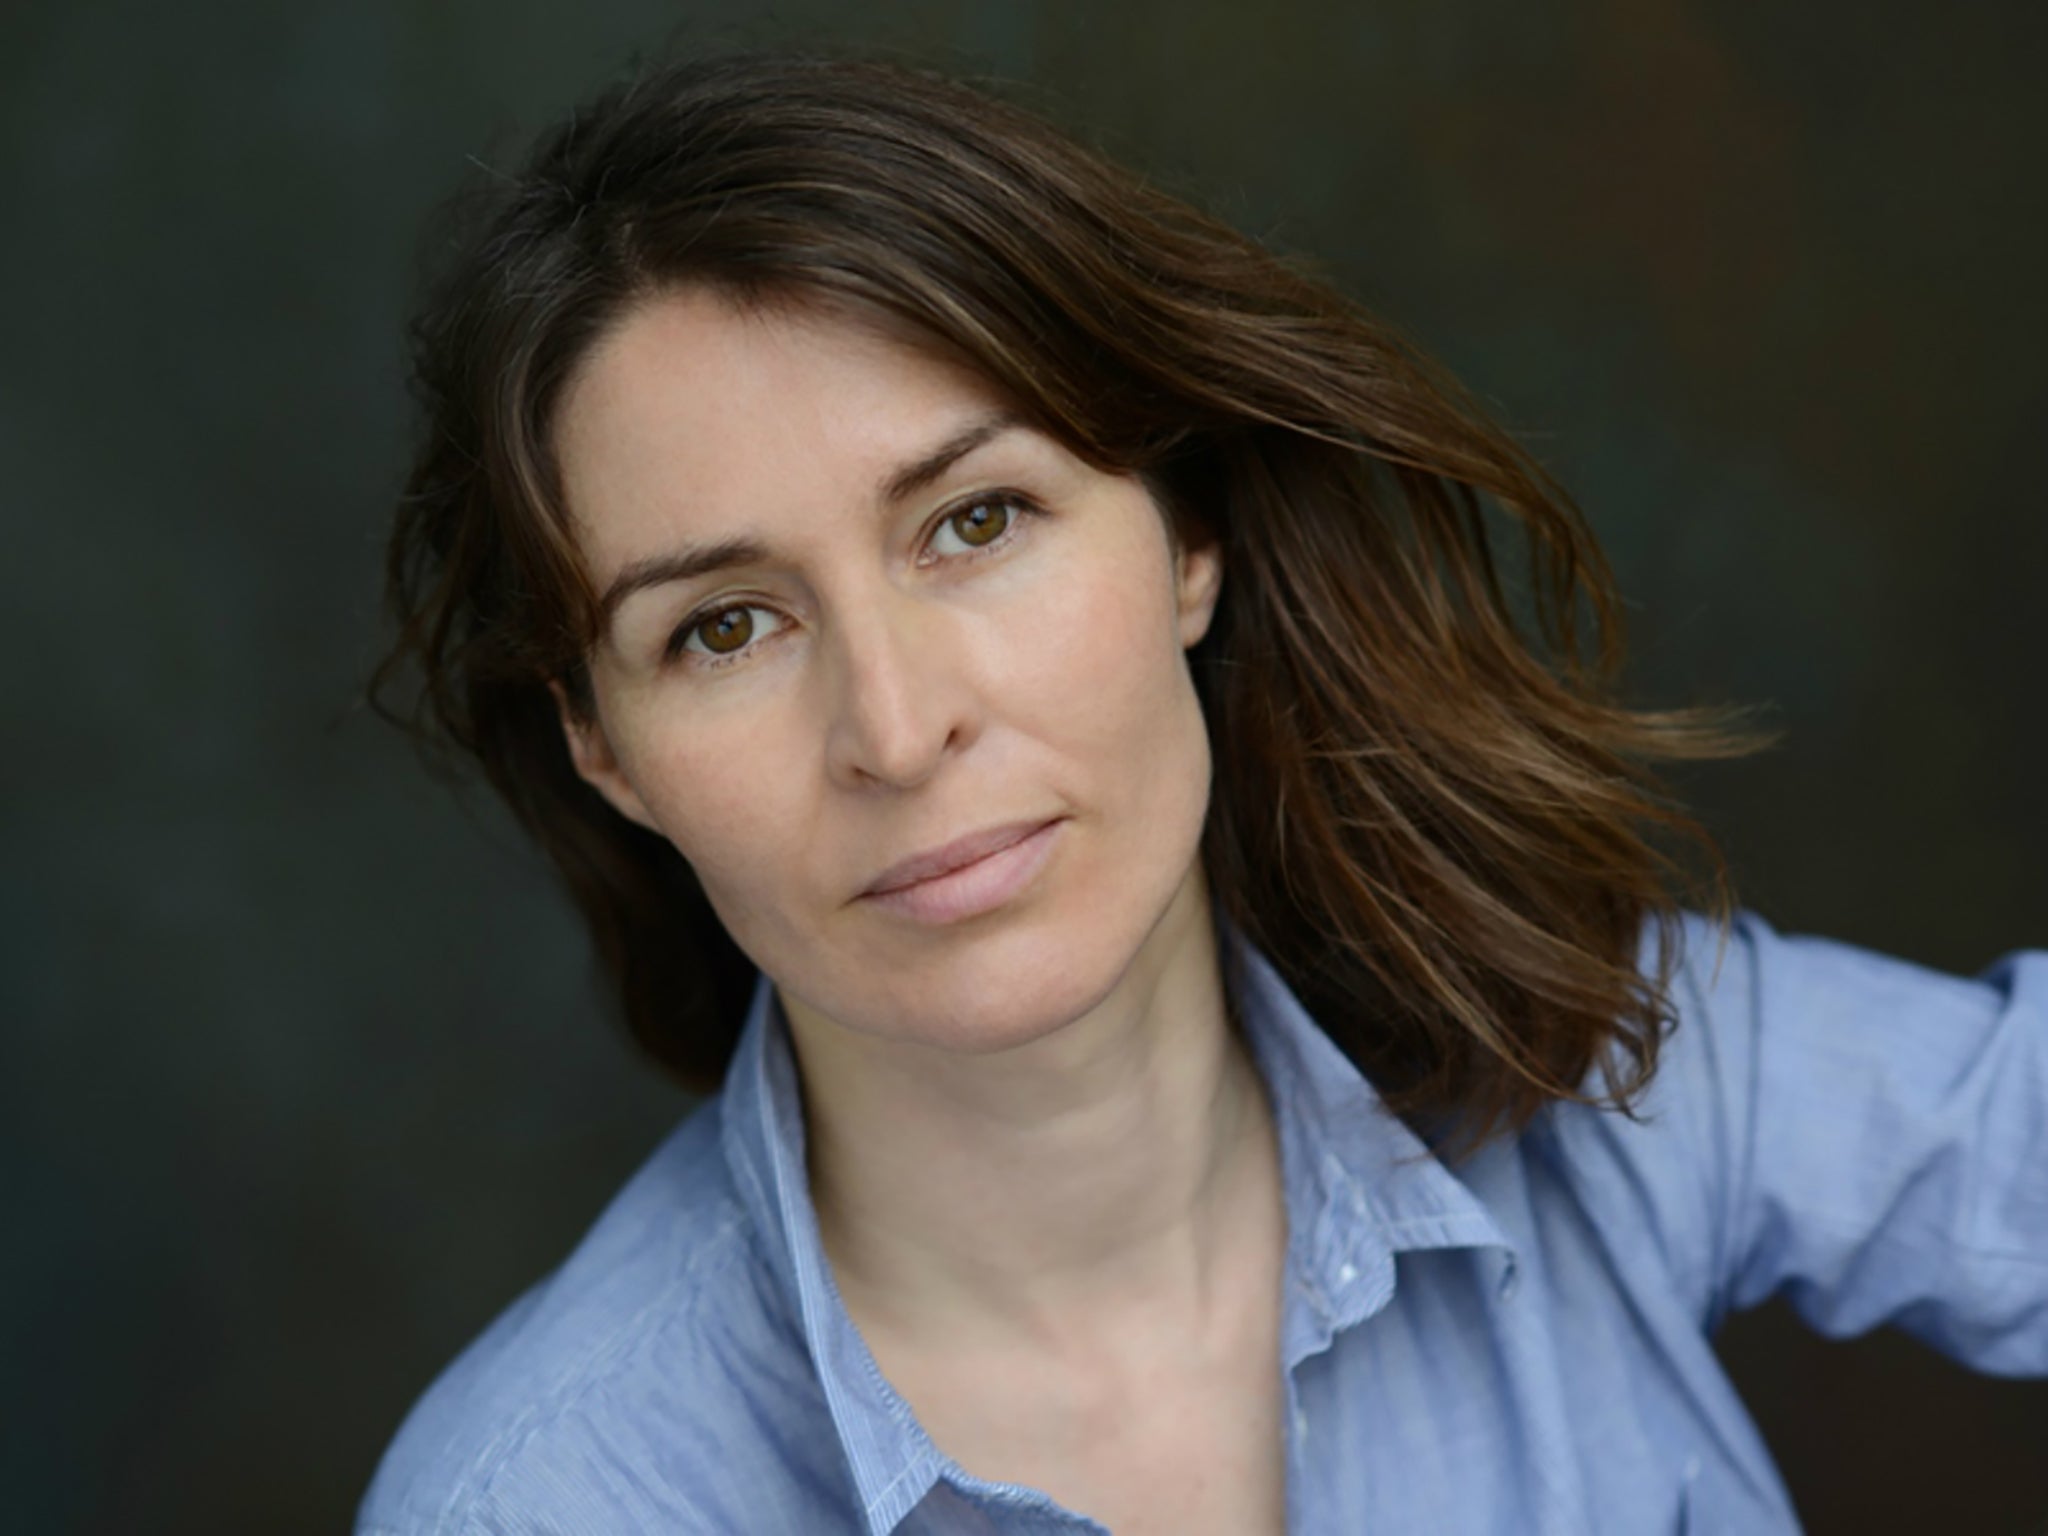 Helen Baxendale interview Nobody asks me to do sex scenes now, which is a great relief The Independent